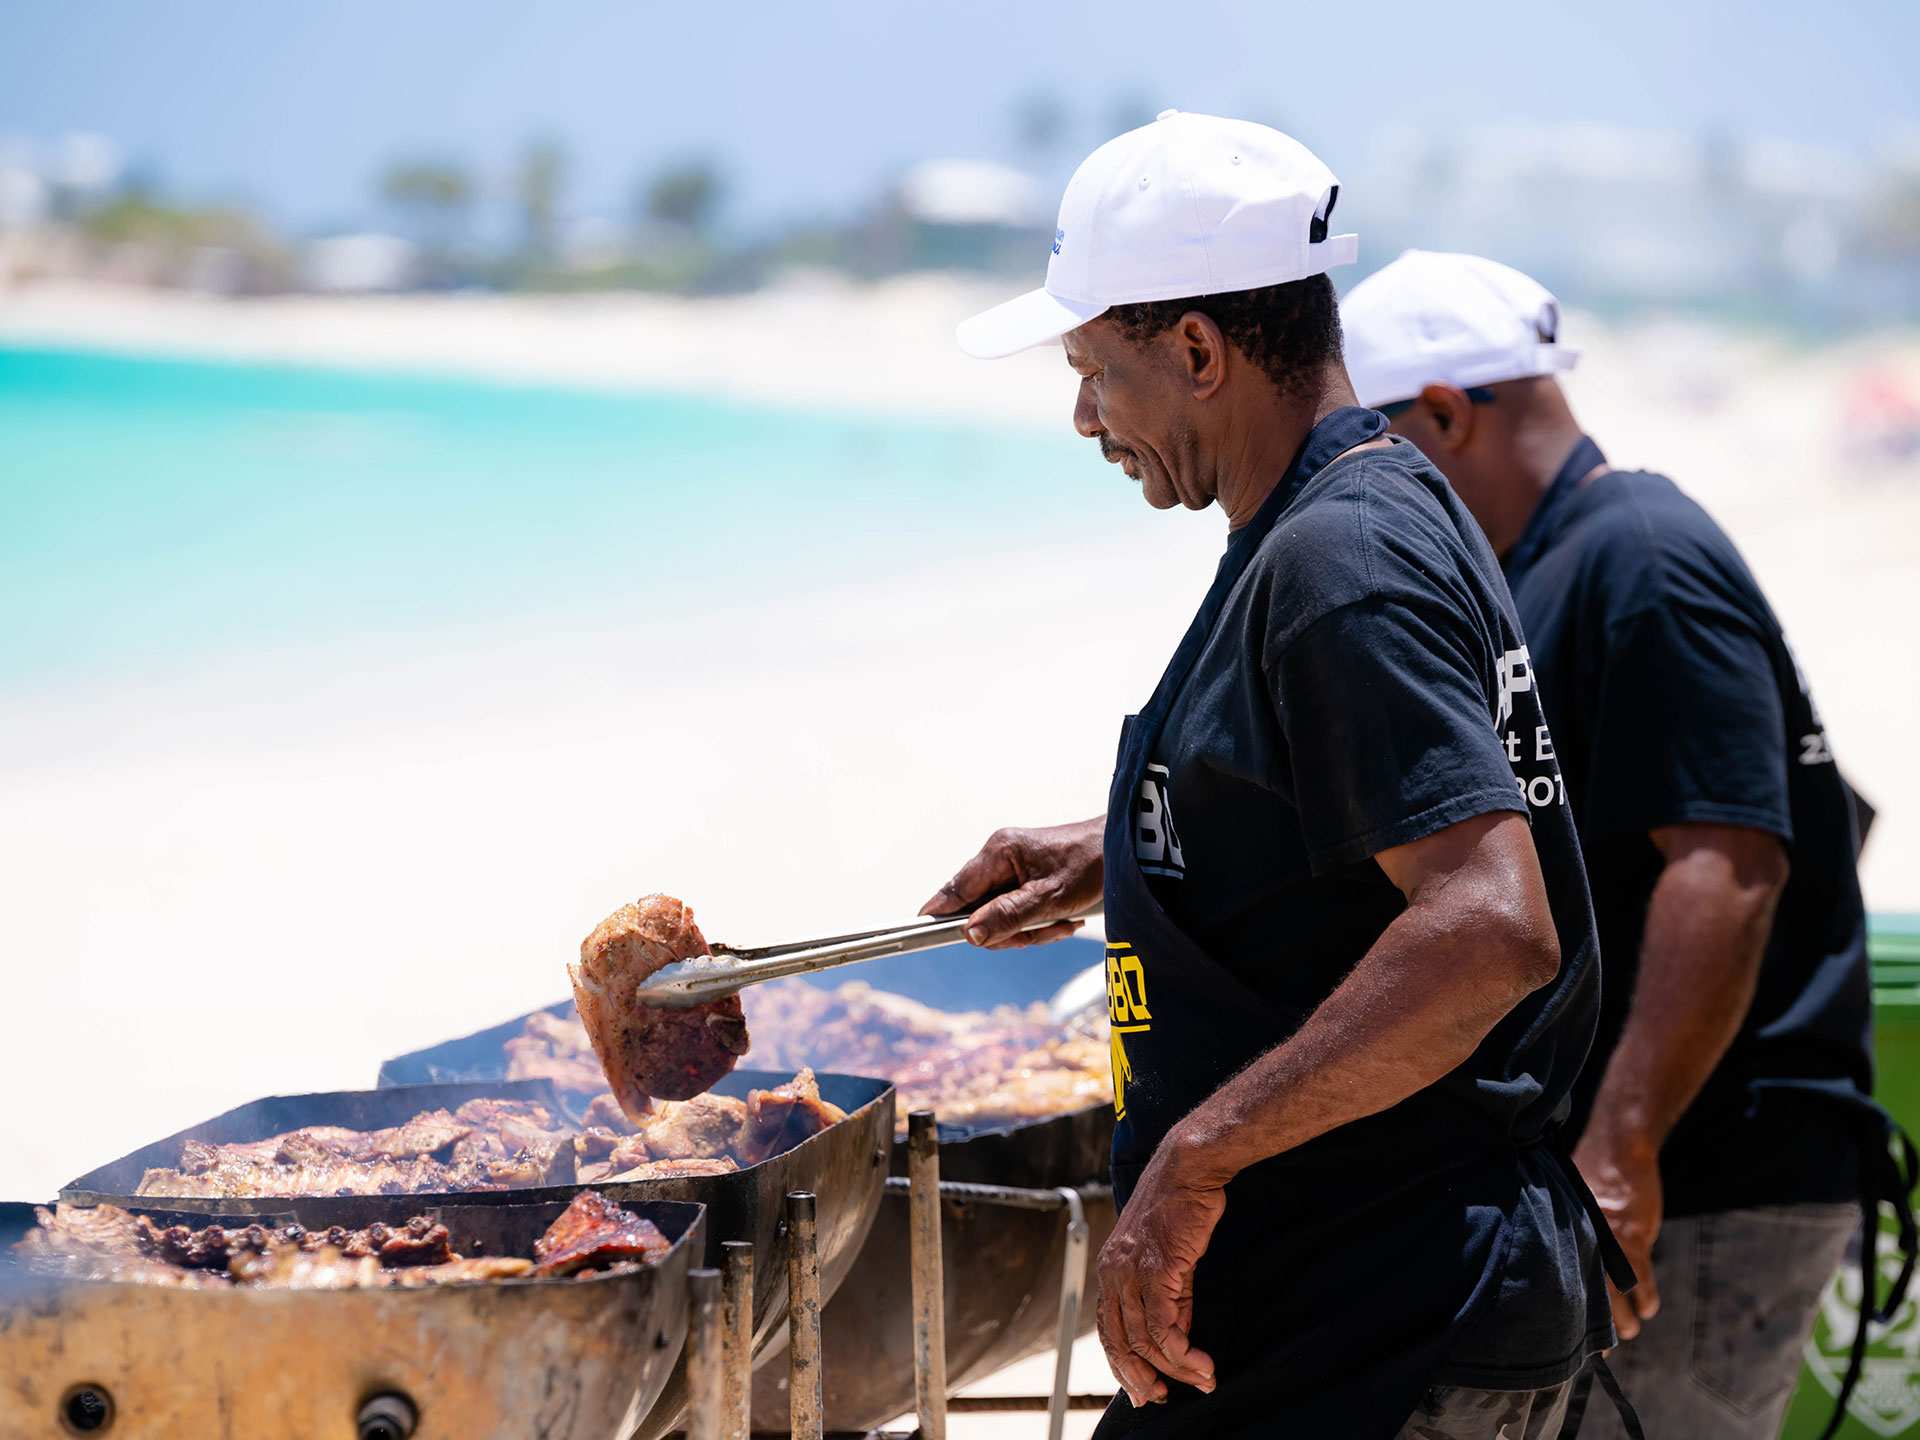 The best things to do in Anguilla | Grilling ribs at the Anguilla Culinary Experience